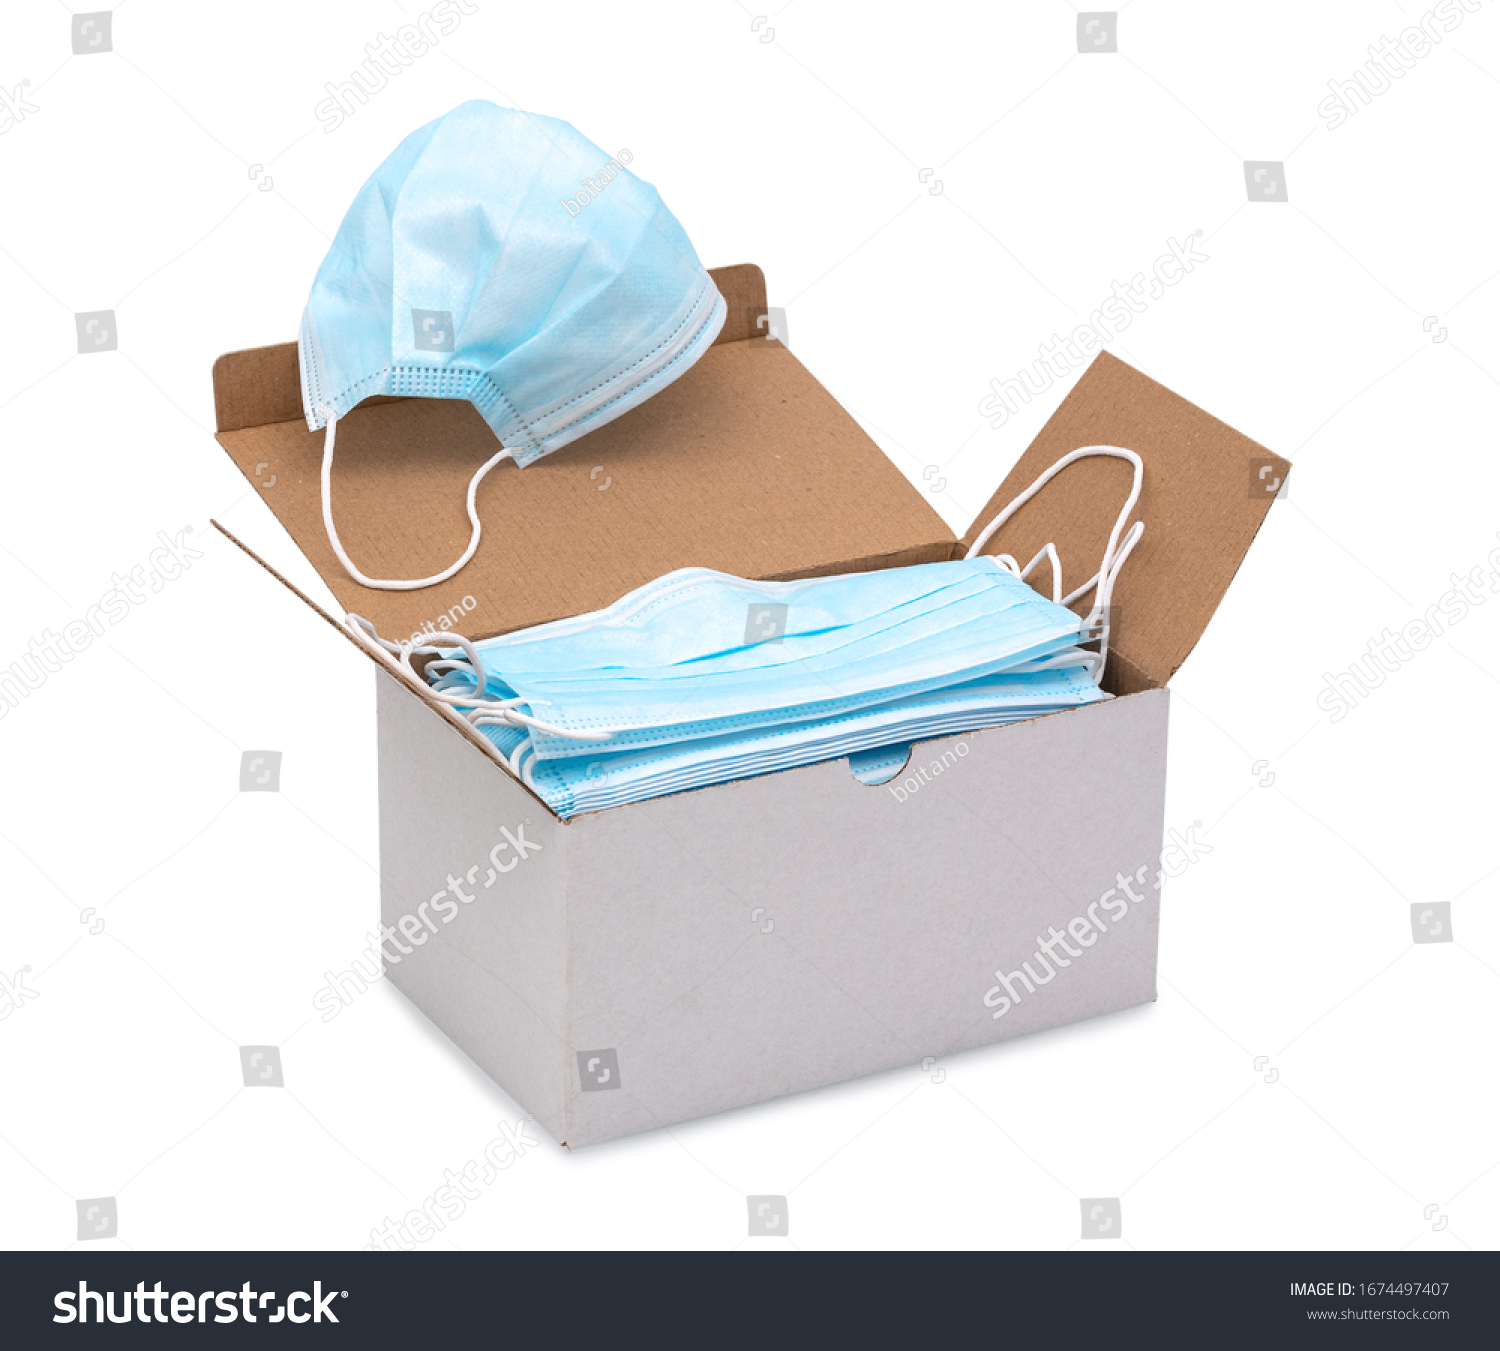 Blue ear loop surgical face masks in a box isolated on white background with clipping (vector) path. Disposable procedural face mask with malleable nose clip. Protective mask with elastic ear bands. #1674497407